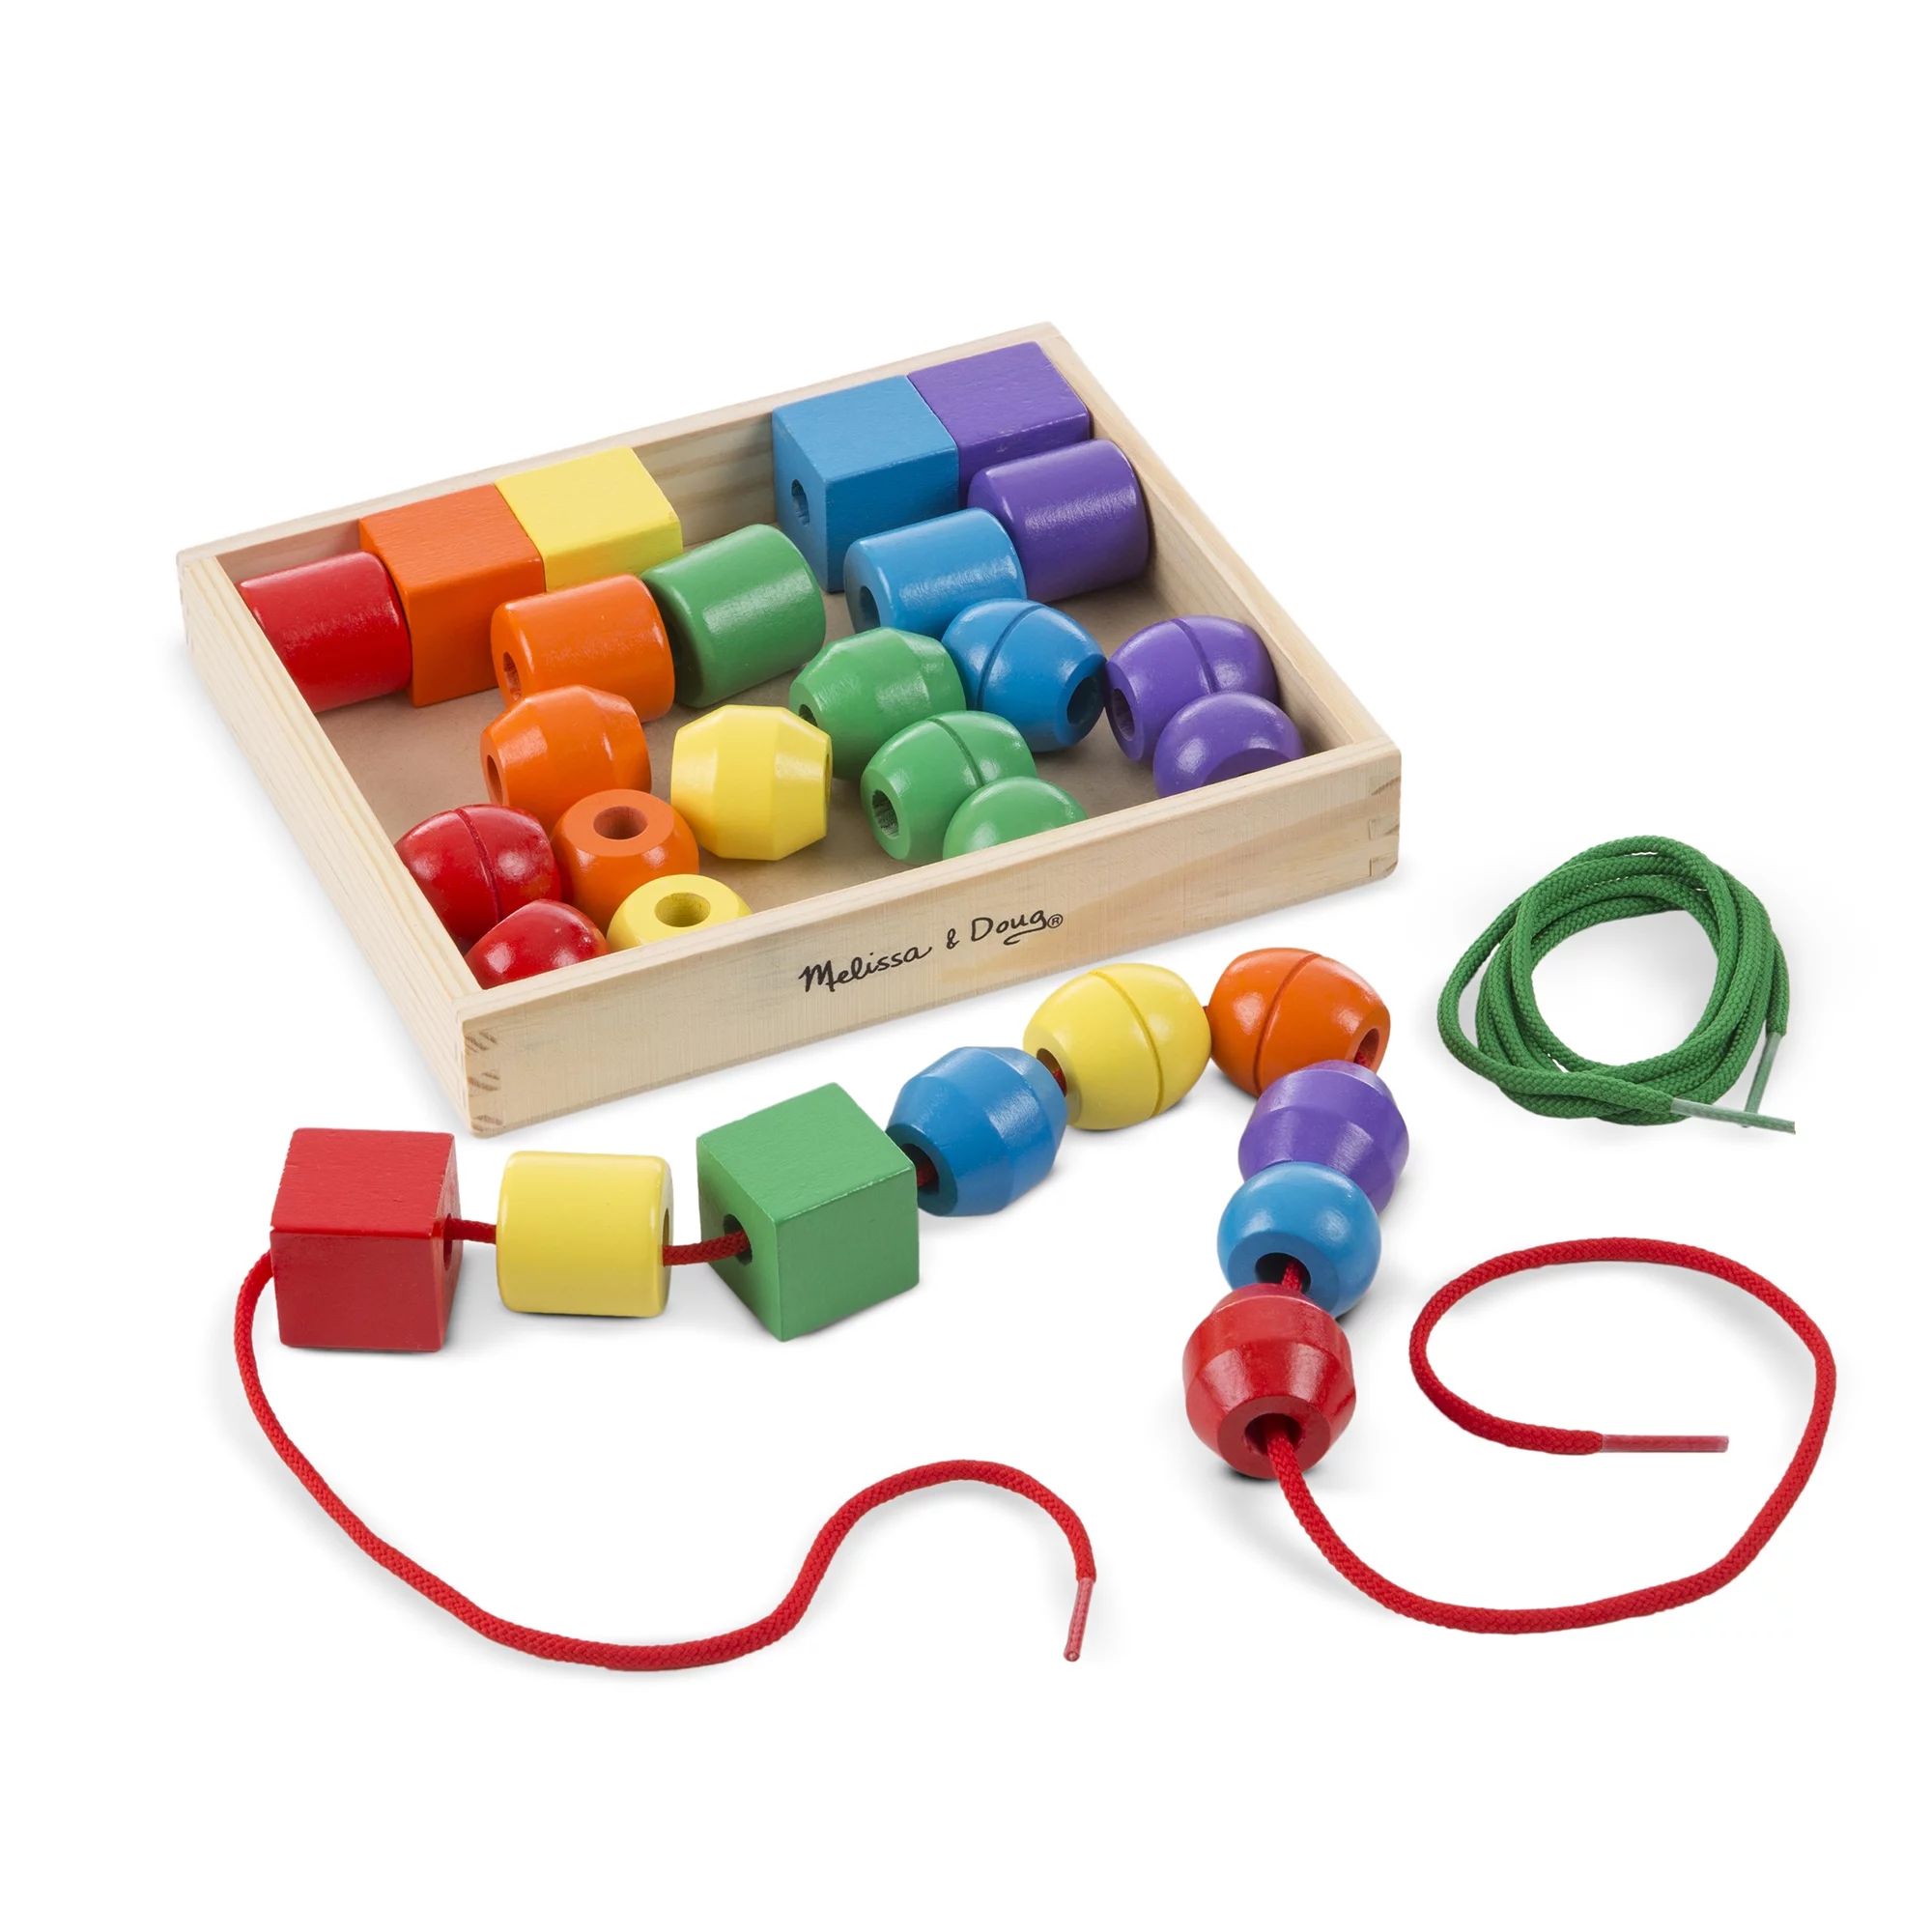 Melissa & Doug Primary Lacing Beads - Educational Toy With 8 Wooden Beads and 2 Laces | Walmart (US)